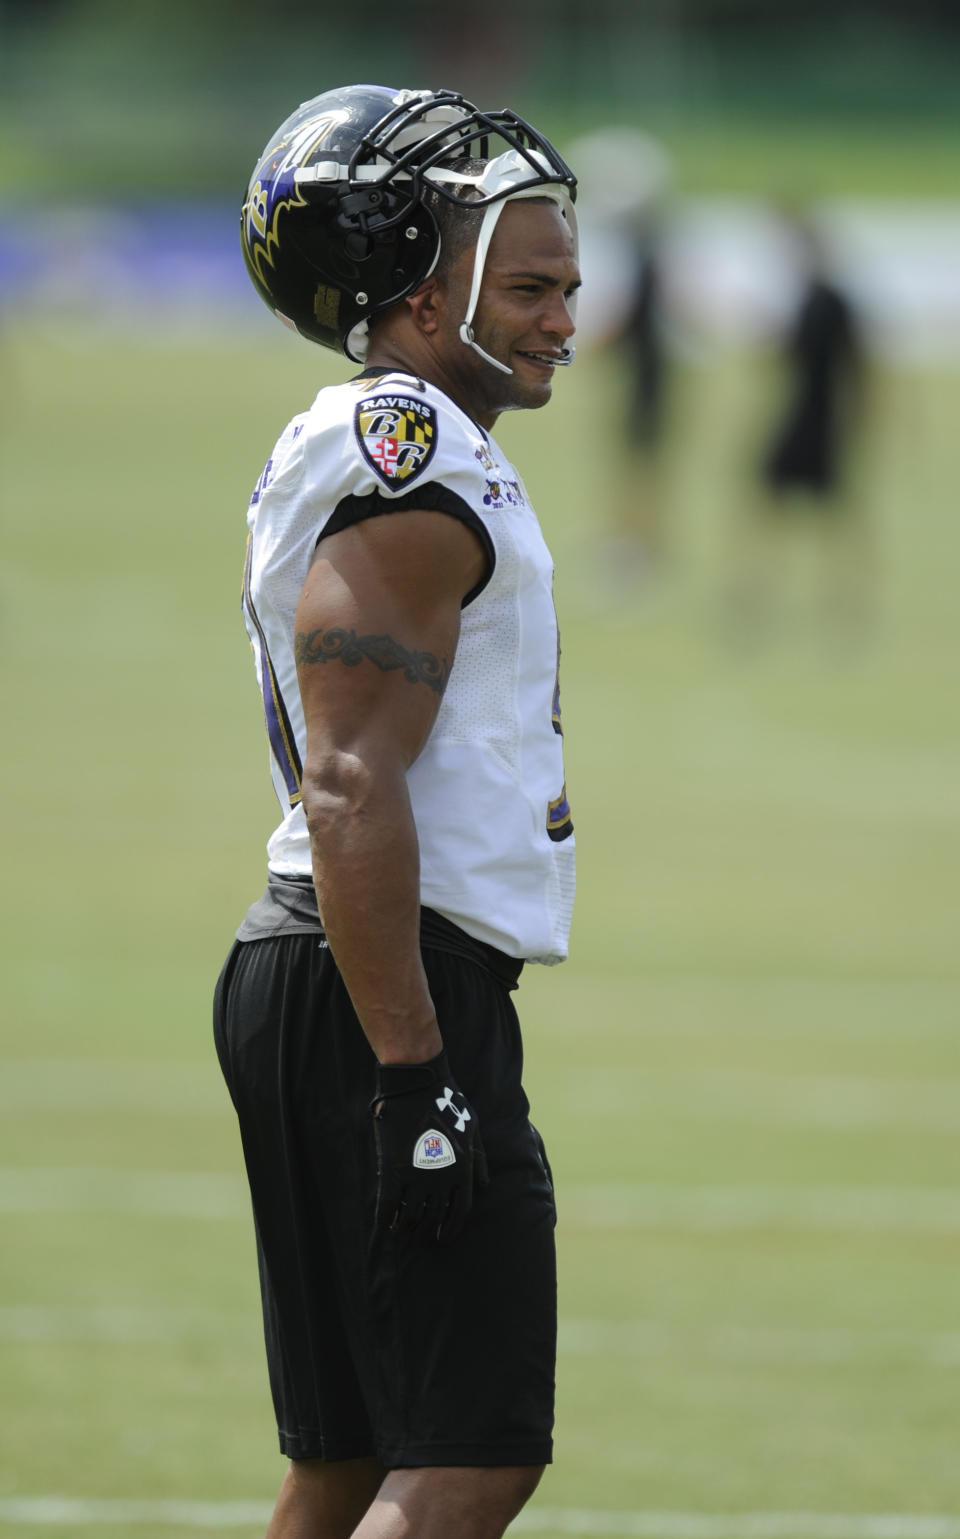 Former Baltimore Ravens linebacker, Brendon Ayanbadejo, has been a vocal long-time supporter of marriage equality. The football player <a href="http://www.huffingtonpost.com/brendon-ayanbadejo/same-sex-marriages-whats_b_190591.html">blogged about same-sex marriages</a> for The Huffington Post in 2009, made a <a href="http://www.huffingtonpost.com/2012/09/07/brendon-ayanbadejo-ravens-emmett-burns-marriage_n_1863488.html?utm_hp_ref=gay-voices&ir=Gay Voices">video for Marylanders for Marriage Equality</a>, and donated Ravens tickets to the cause, which drew <a href="http://www.wbaltv.com/news/politics/Delegate-unhappy-with-Ravens-player-s-support-of-same-sex-marriage/-/9379266/16487740/-/mro08gz/-/index.html?absolute=true">criticism from Baltimore County Delegate Emmett Burns Jr. in late August</a>. 